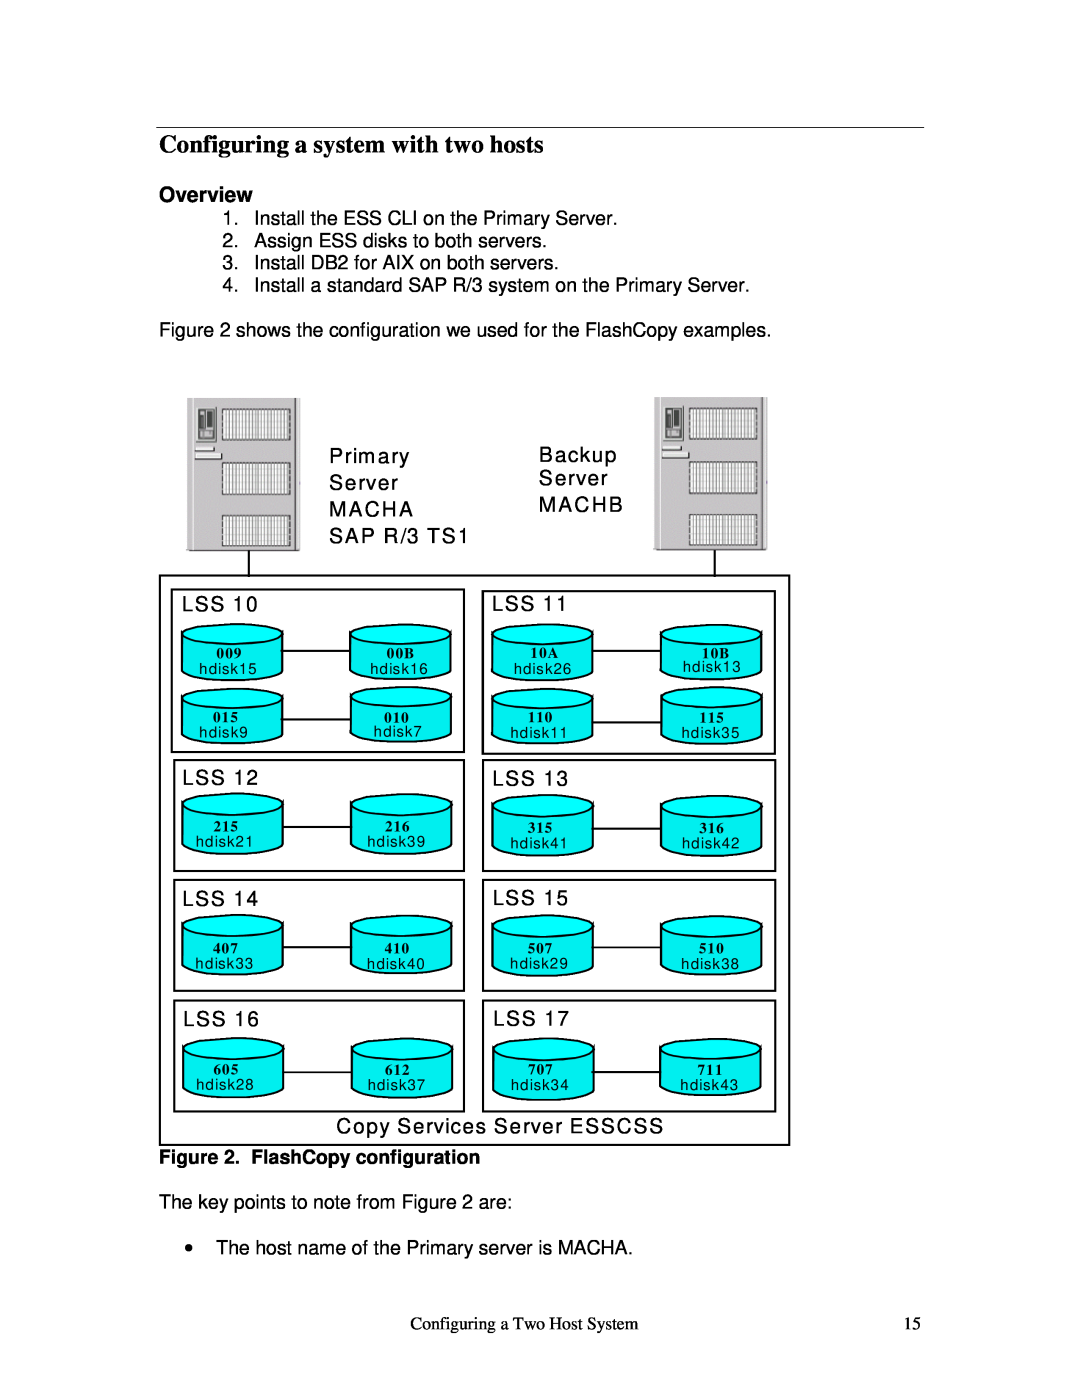 IBM V7.2 manual PrimaryBackup ServerServer MACHAMACHB SAP R/3 TS1, Configuring a system with two hosts, Overview 